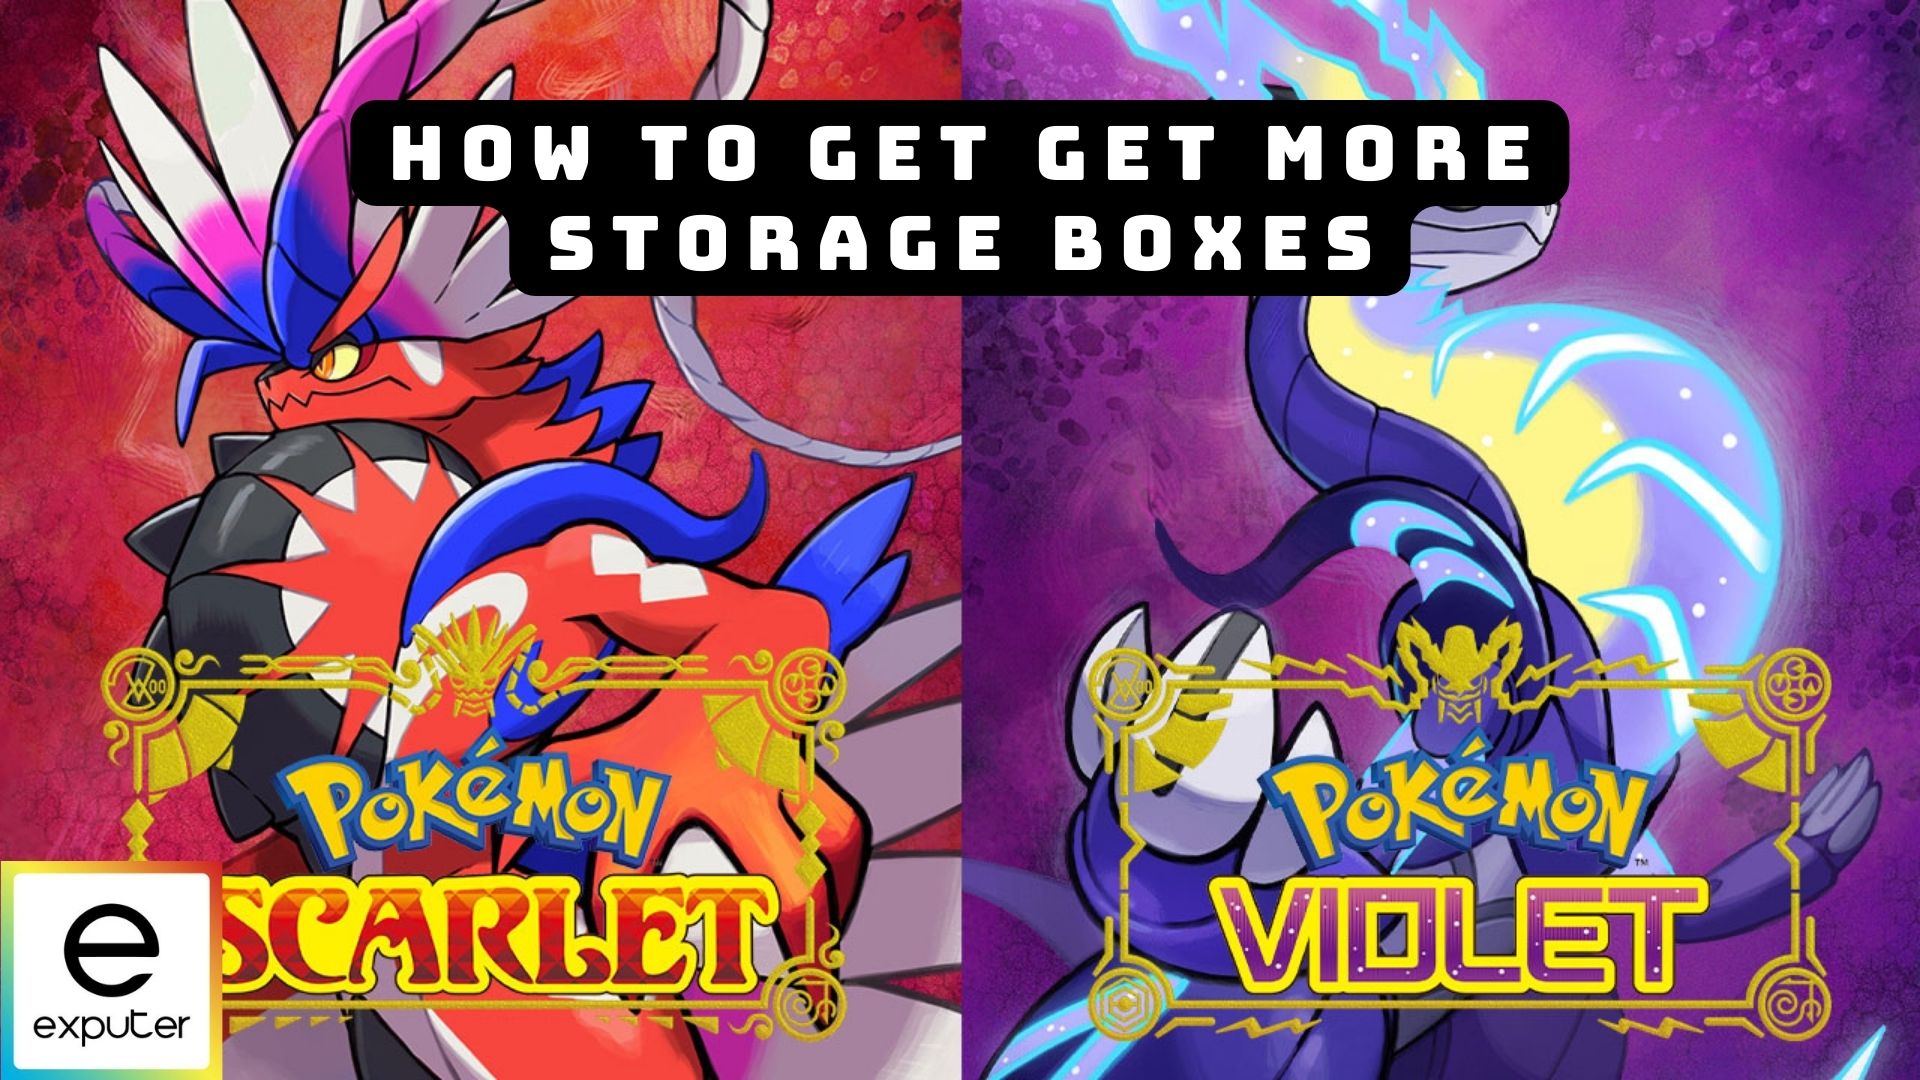 Pokémon Scarlet and Violet - How to Get More Boxes - N4G